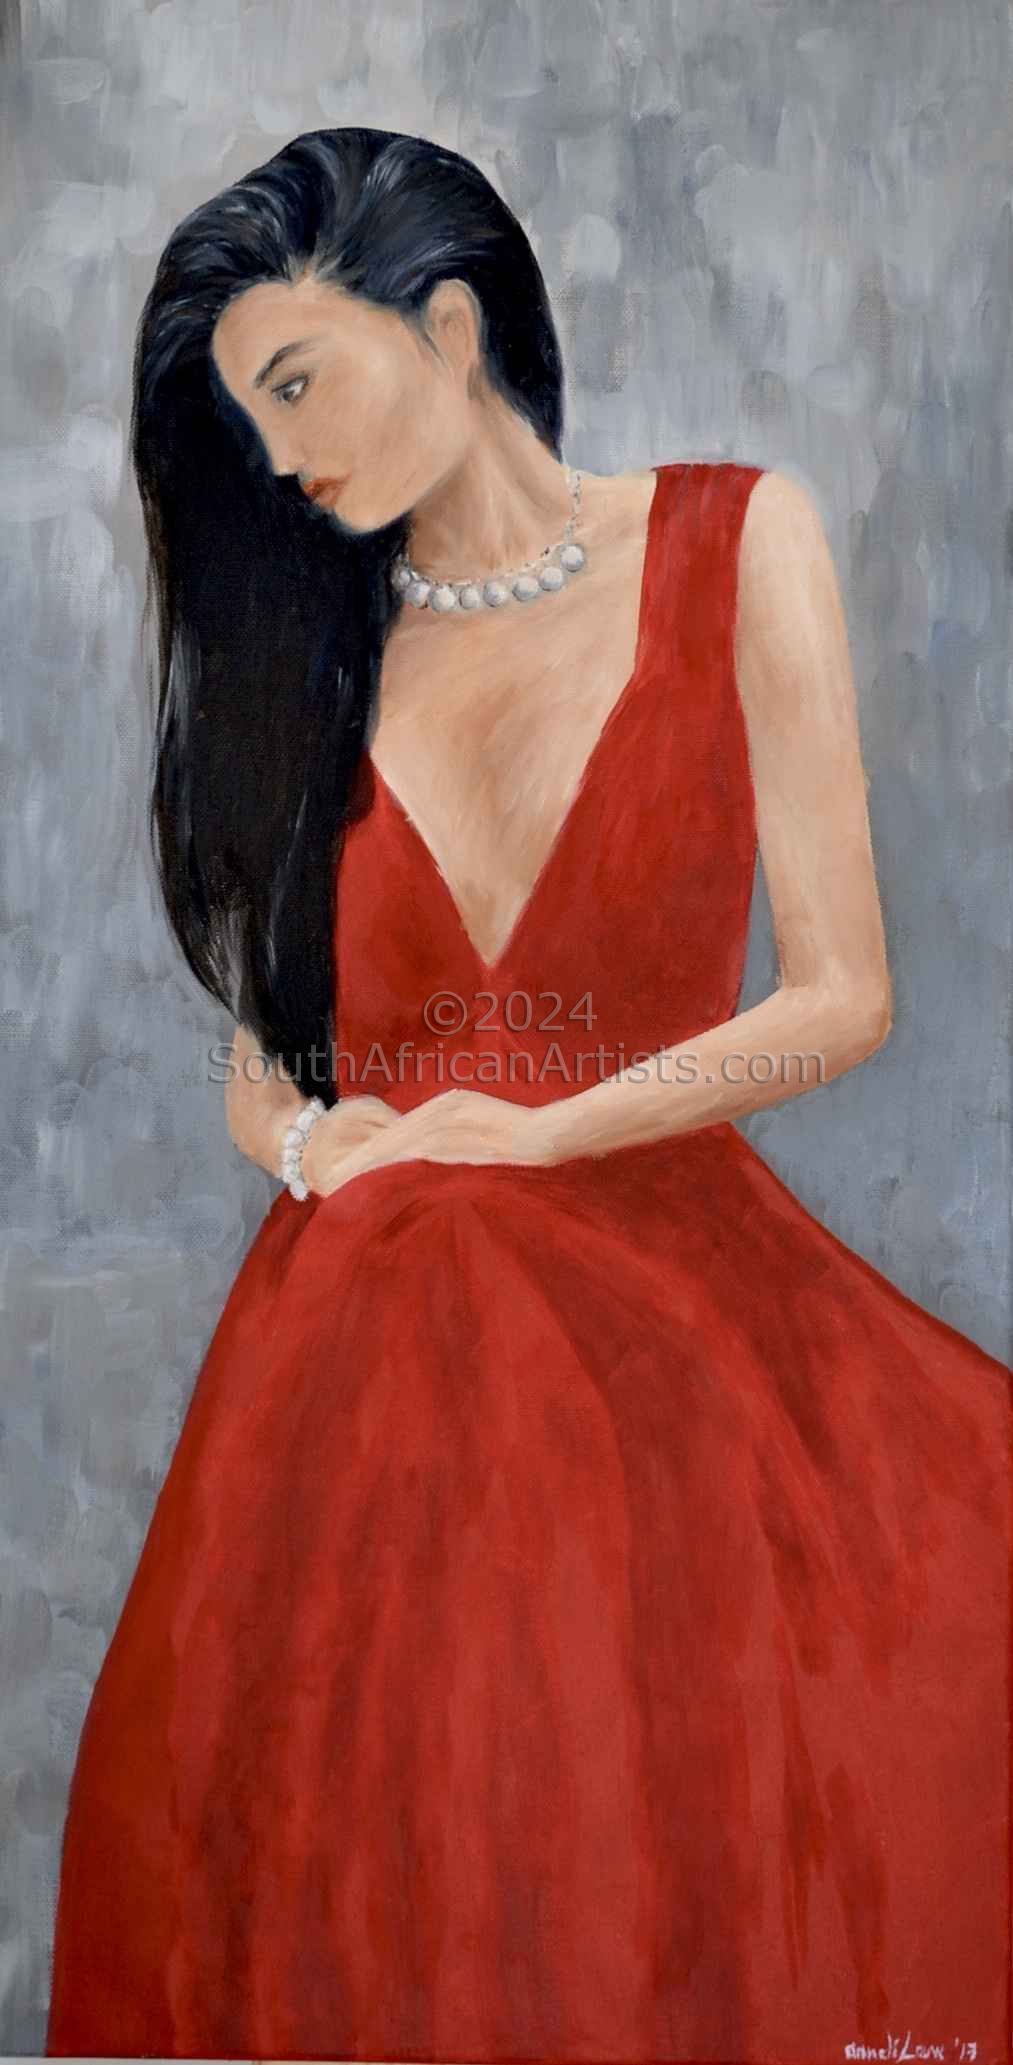 Lady in Red #2